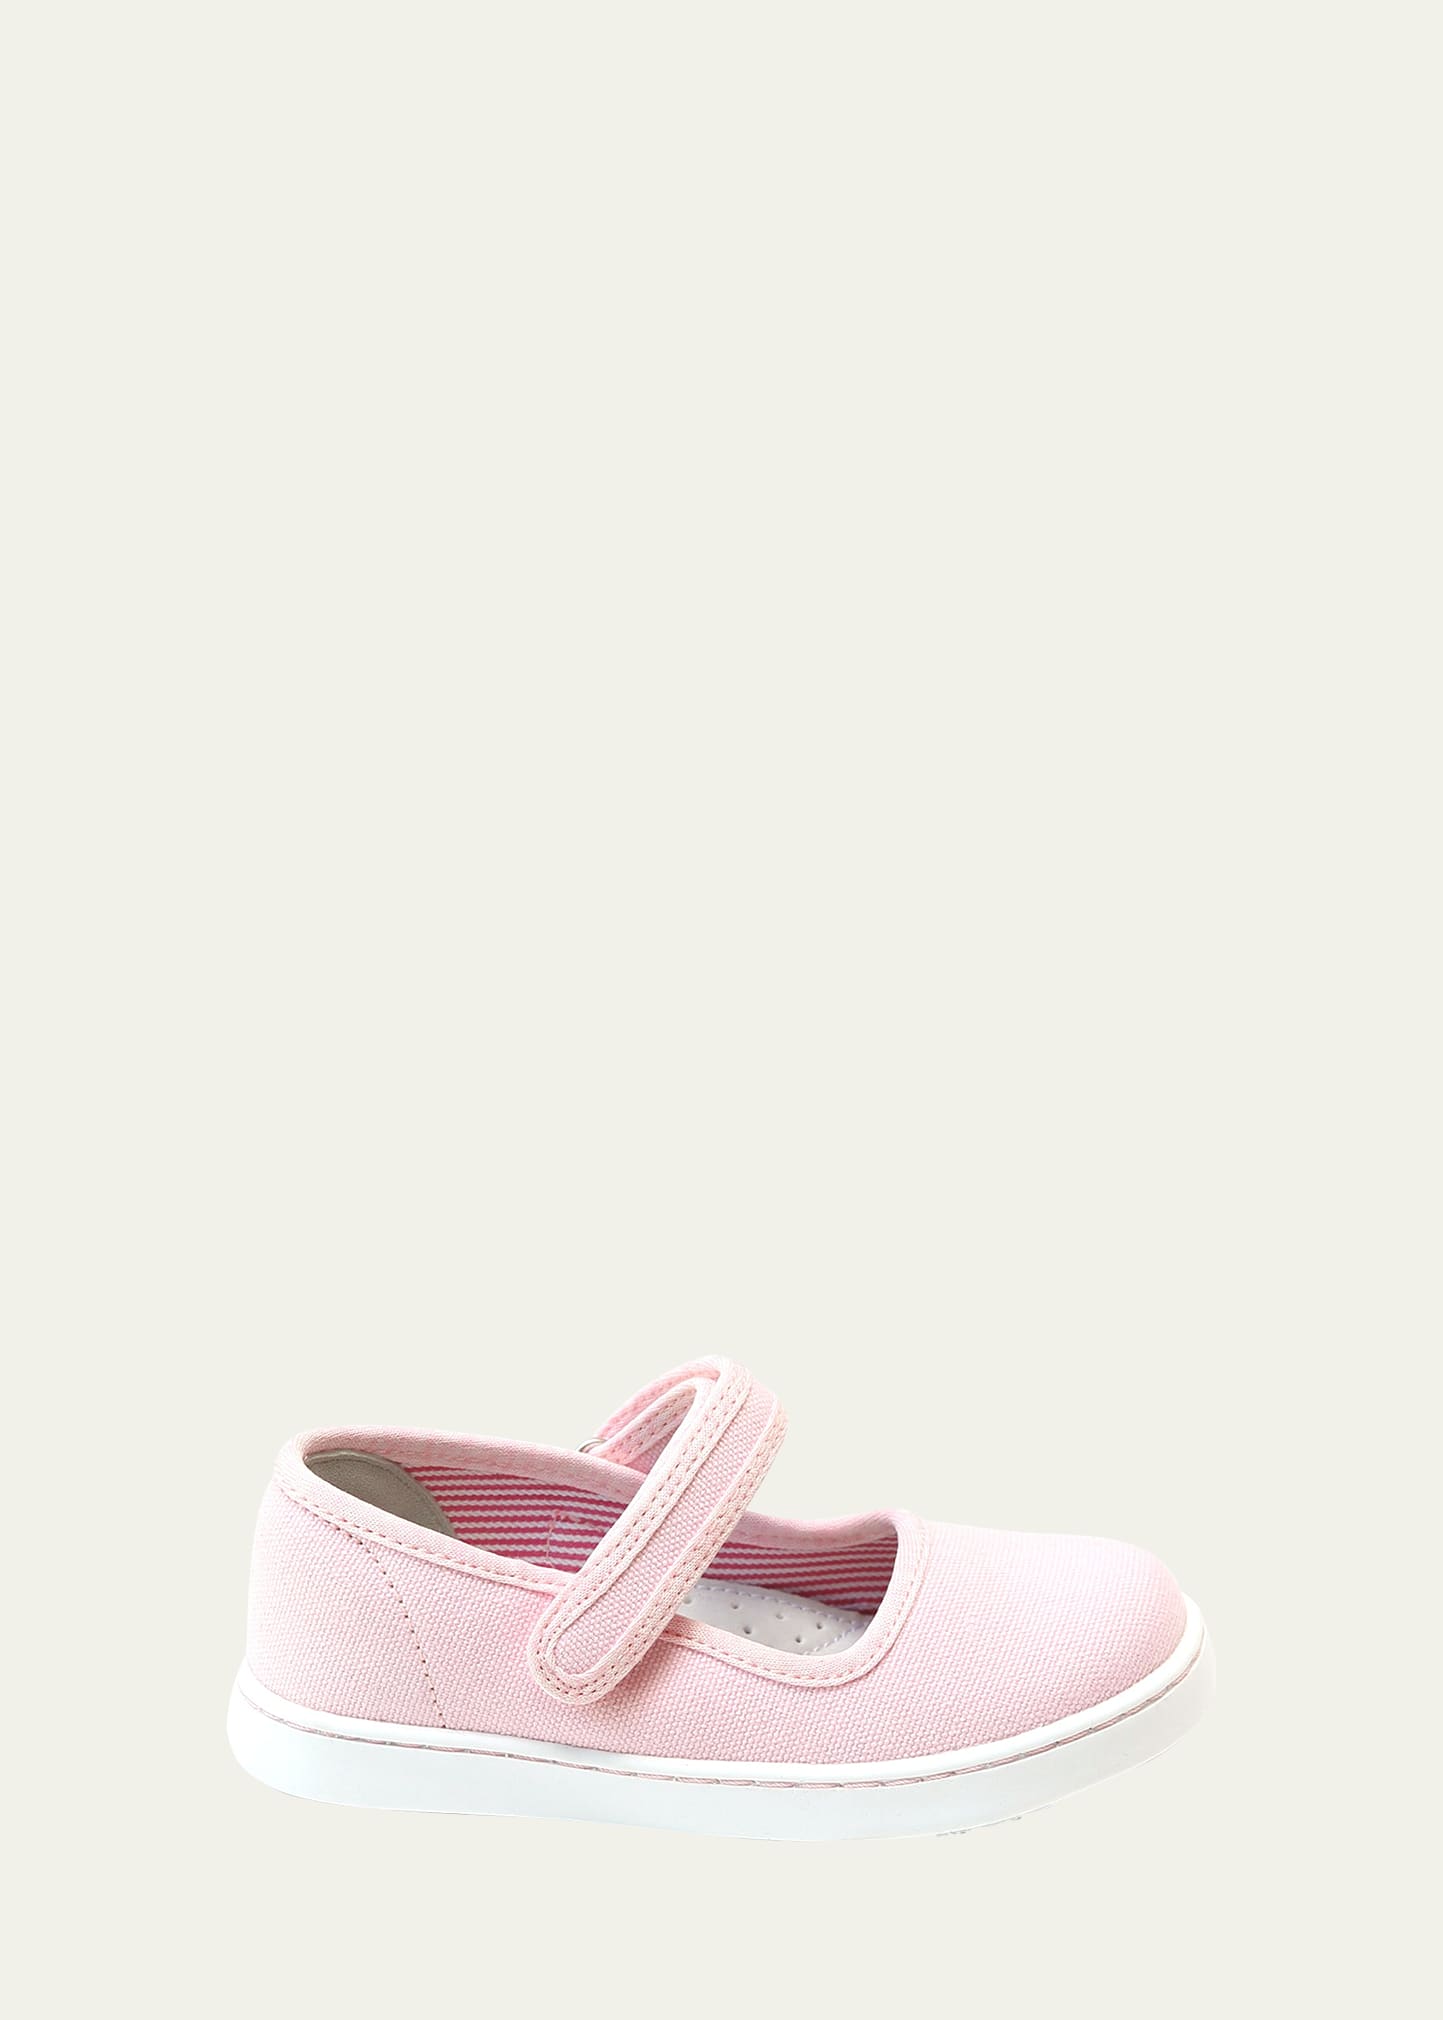 L'amour Shoes Girl's Jenna Canvas Mary Jane Shoes, Baby/kids/toddlers In Medium Pink